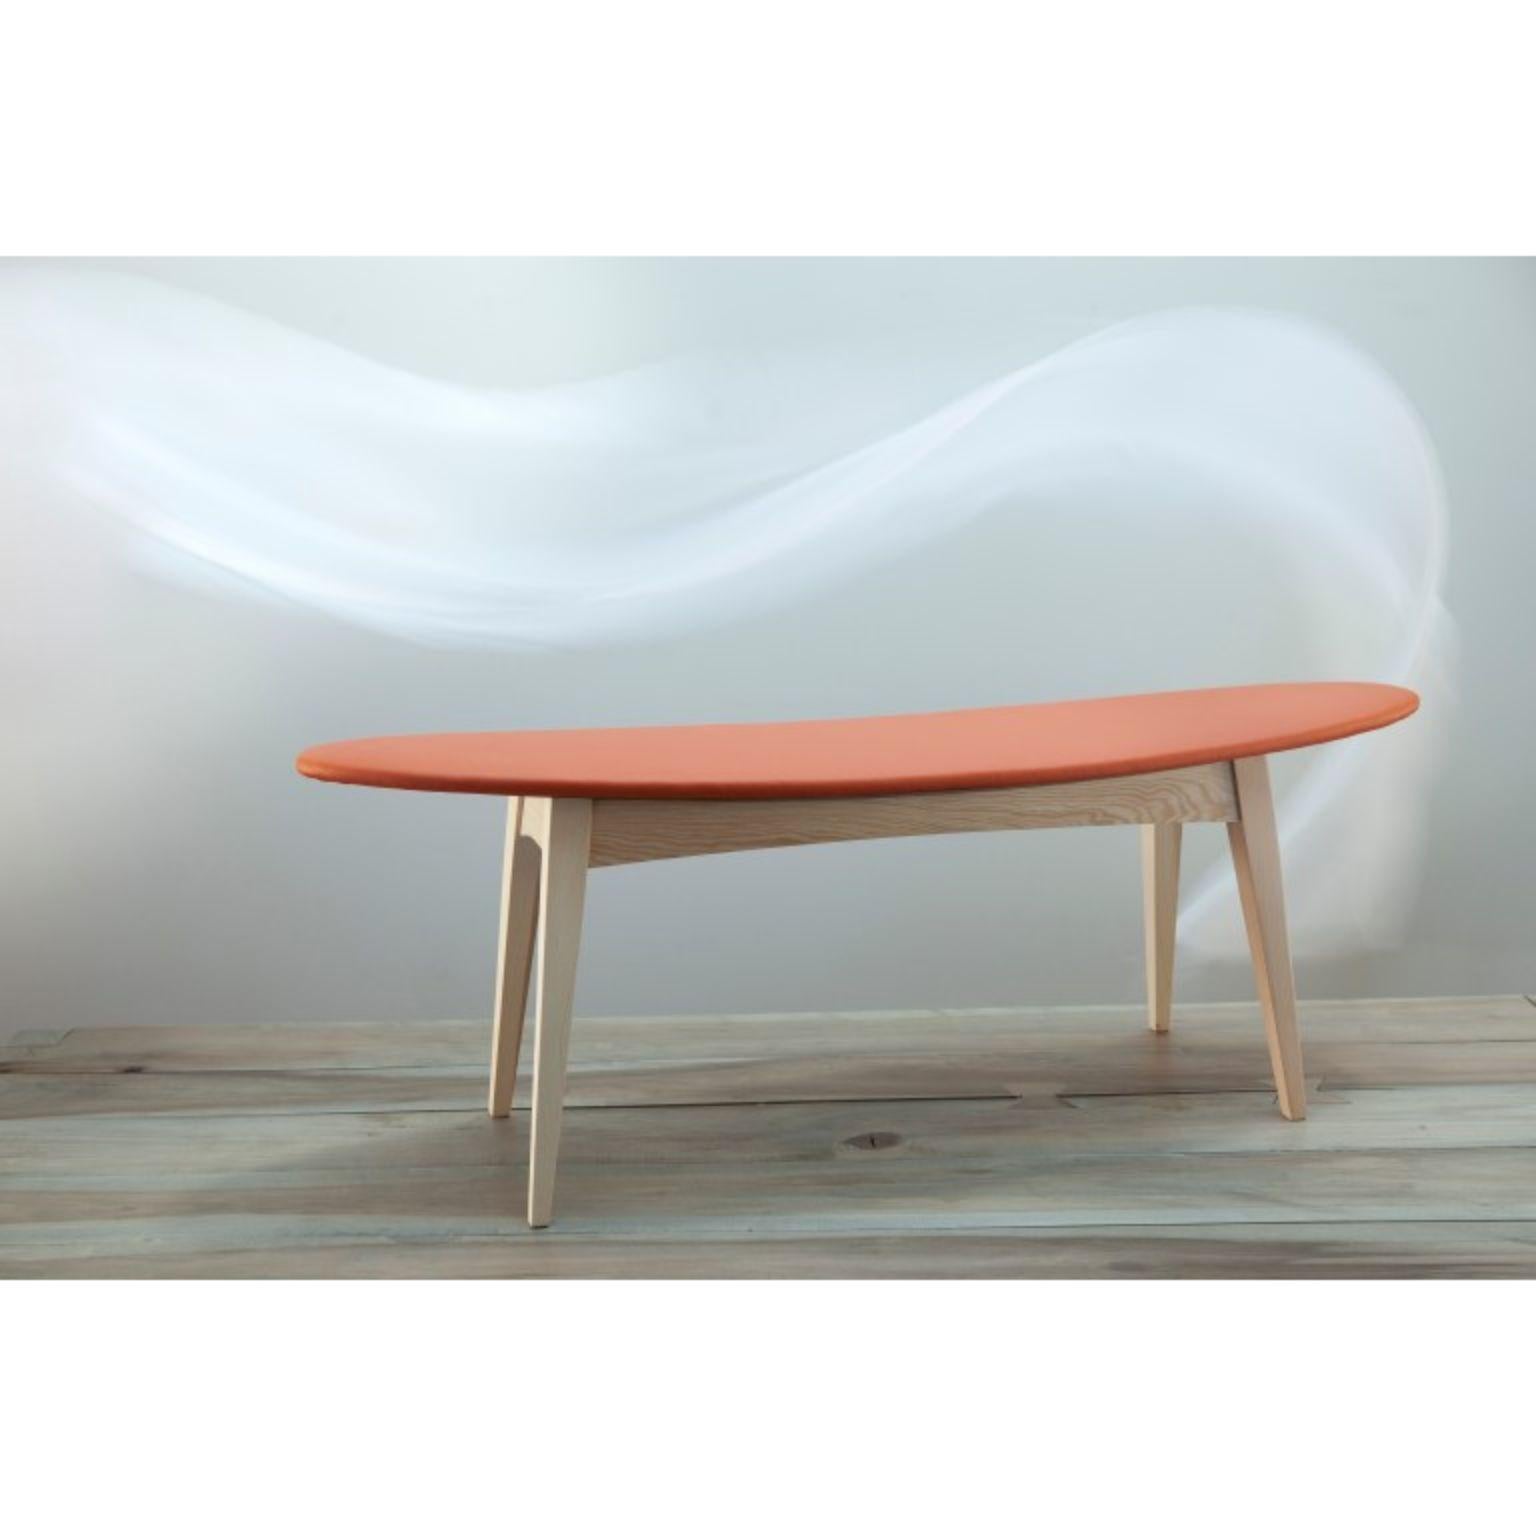 Surf bench by Jean-Baptiste Van den Heede
Signed and numbered
Dimensions: L 34 x W 120 x H 43 cm
Materials: extra Nordic pine wood

Also available in oak wood or other woods on demand.

The SURF bench is an ideal author’s design for the